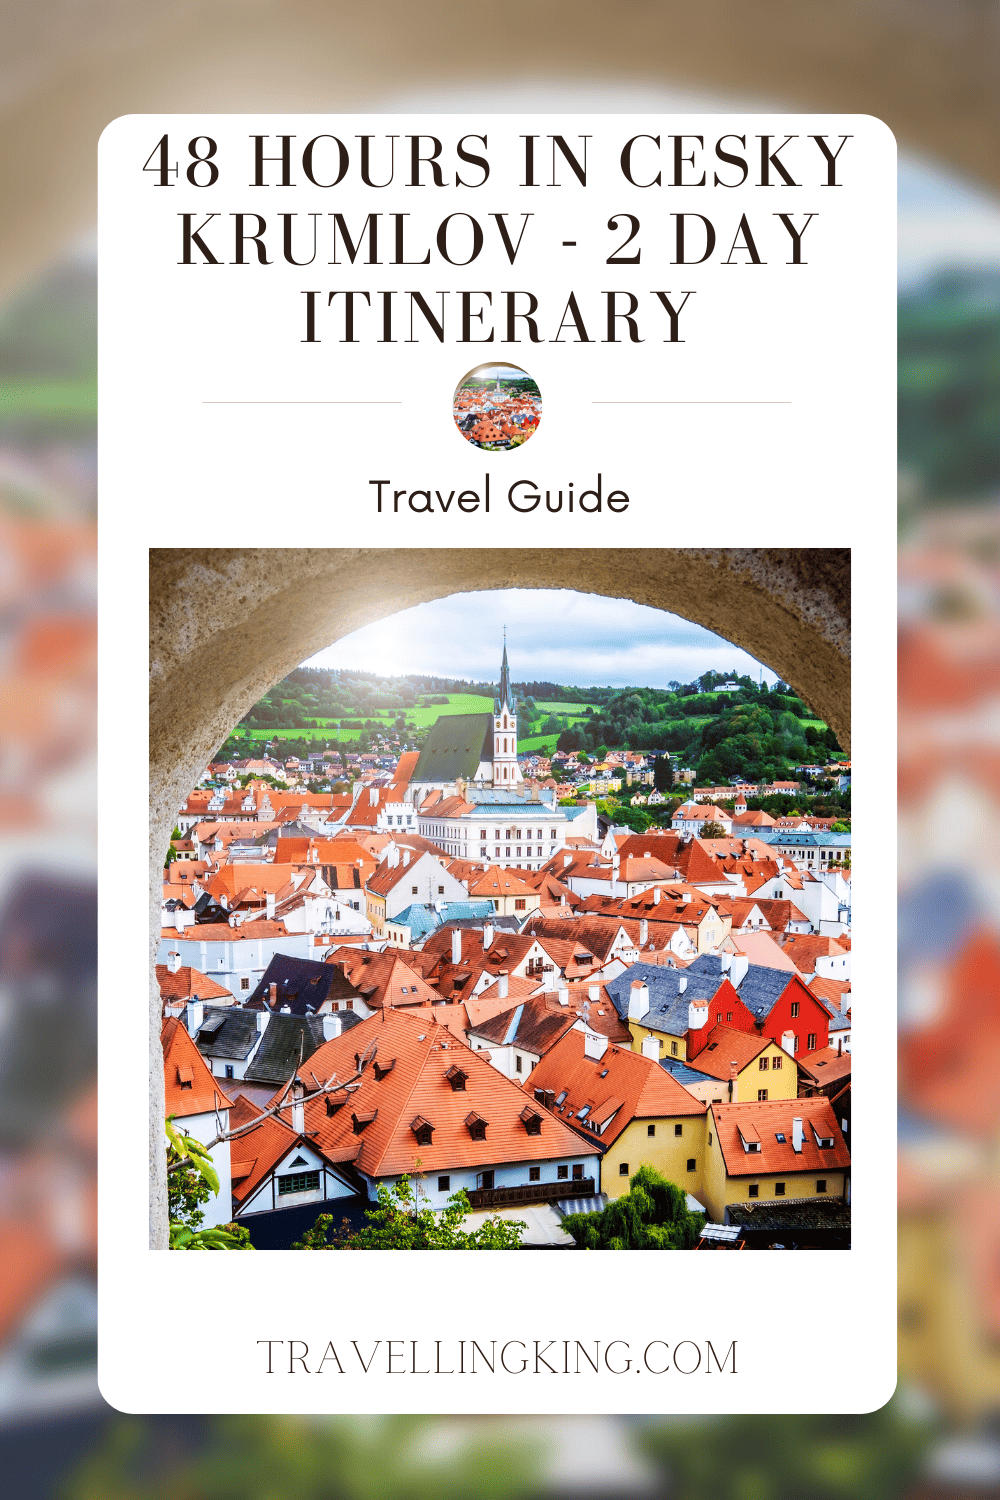 48 Hours in Cesky Krumlov - 2 Day Itinerary